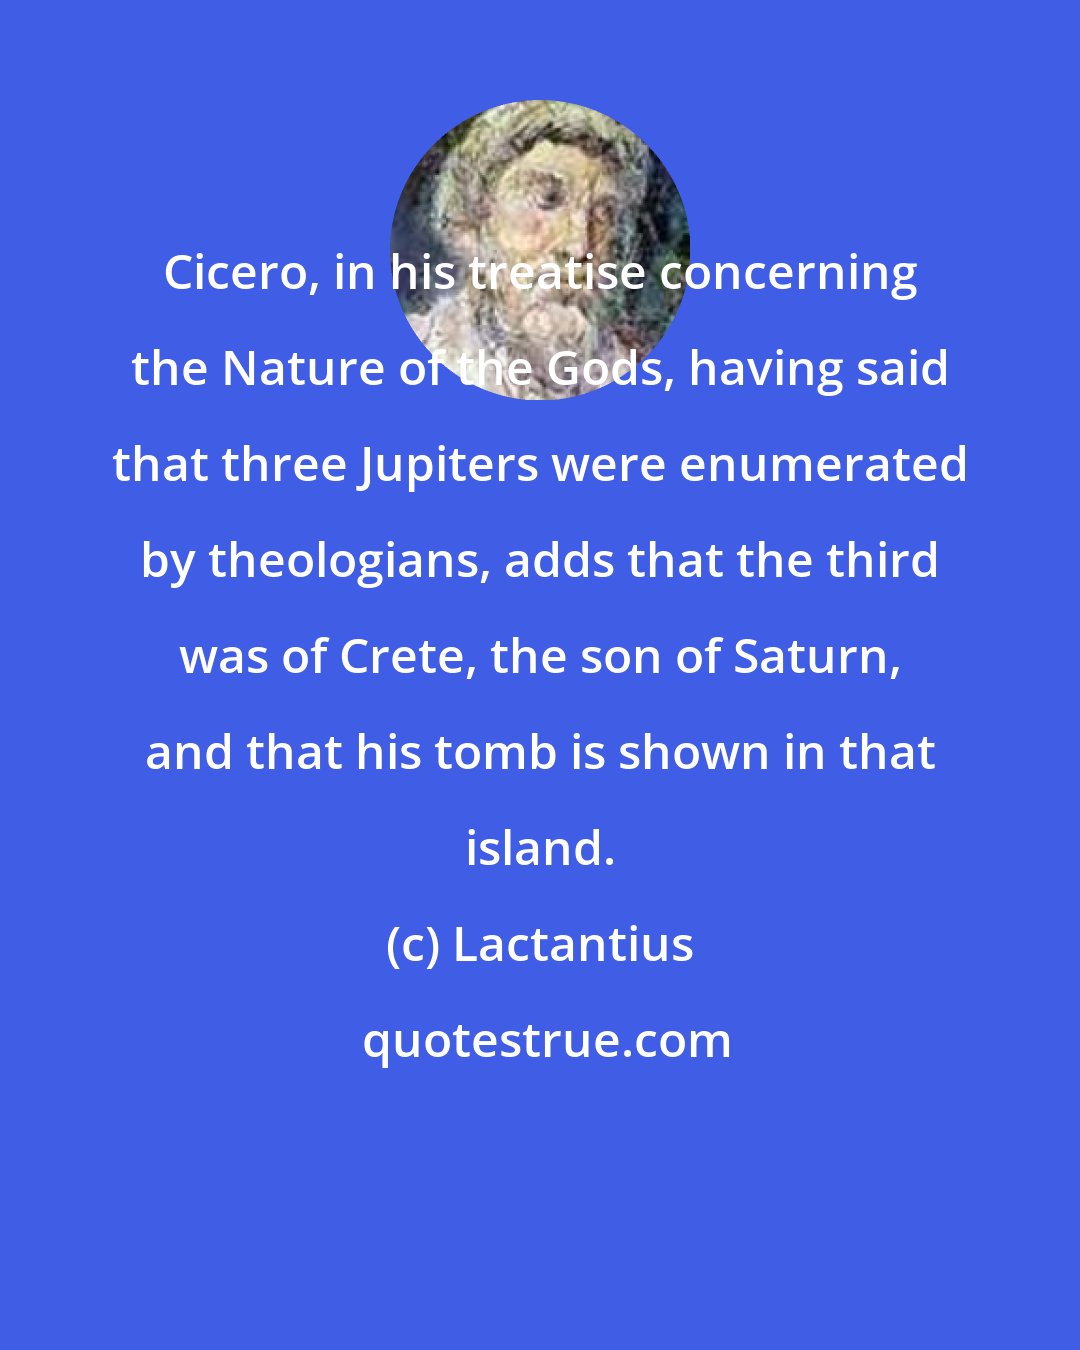 Lactantius: Cicero, in his treatise concerning the Nature of the Gods, having said that three Jupiters were enumerated by theologians, adds that the third was of Crete, the son of Saturn, and that his tomb is shown in that island.